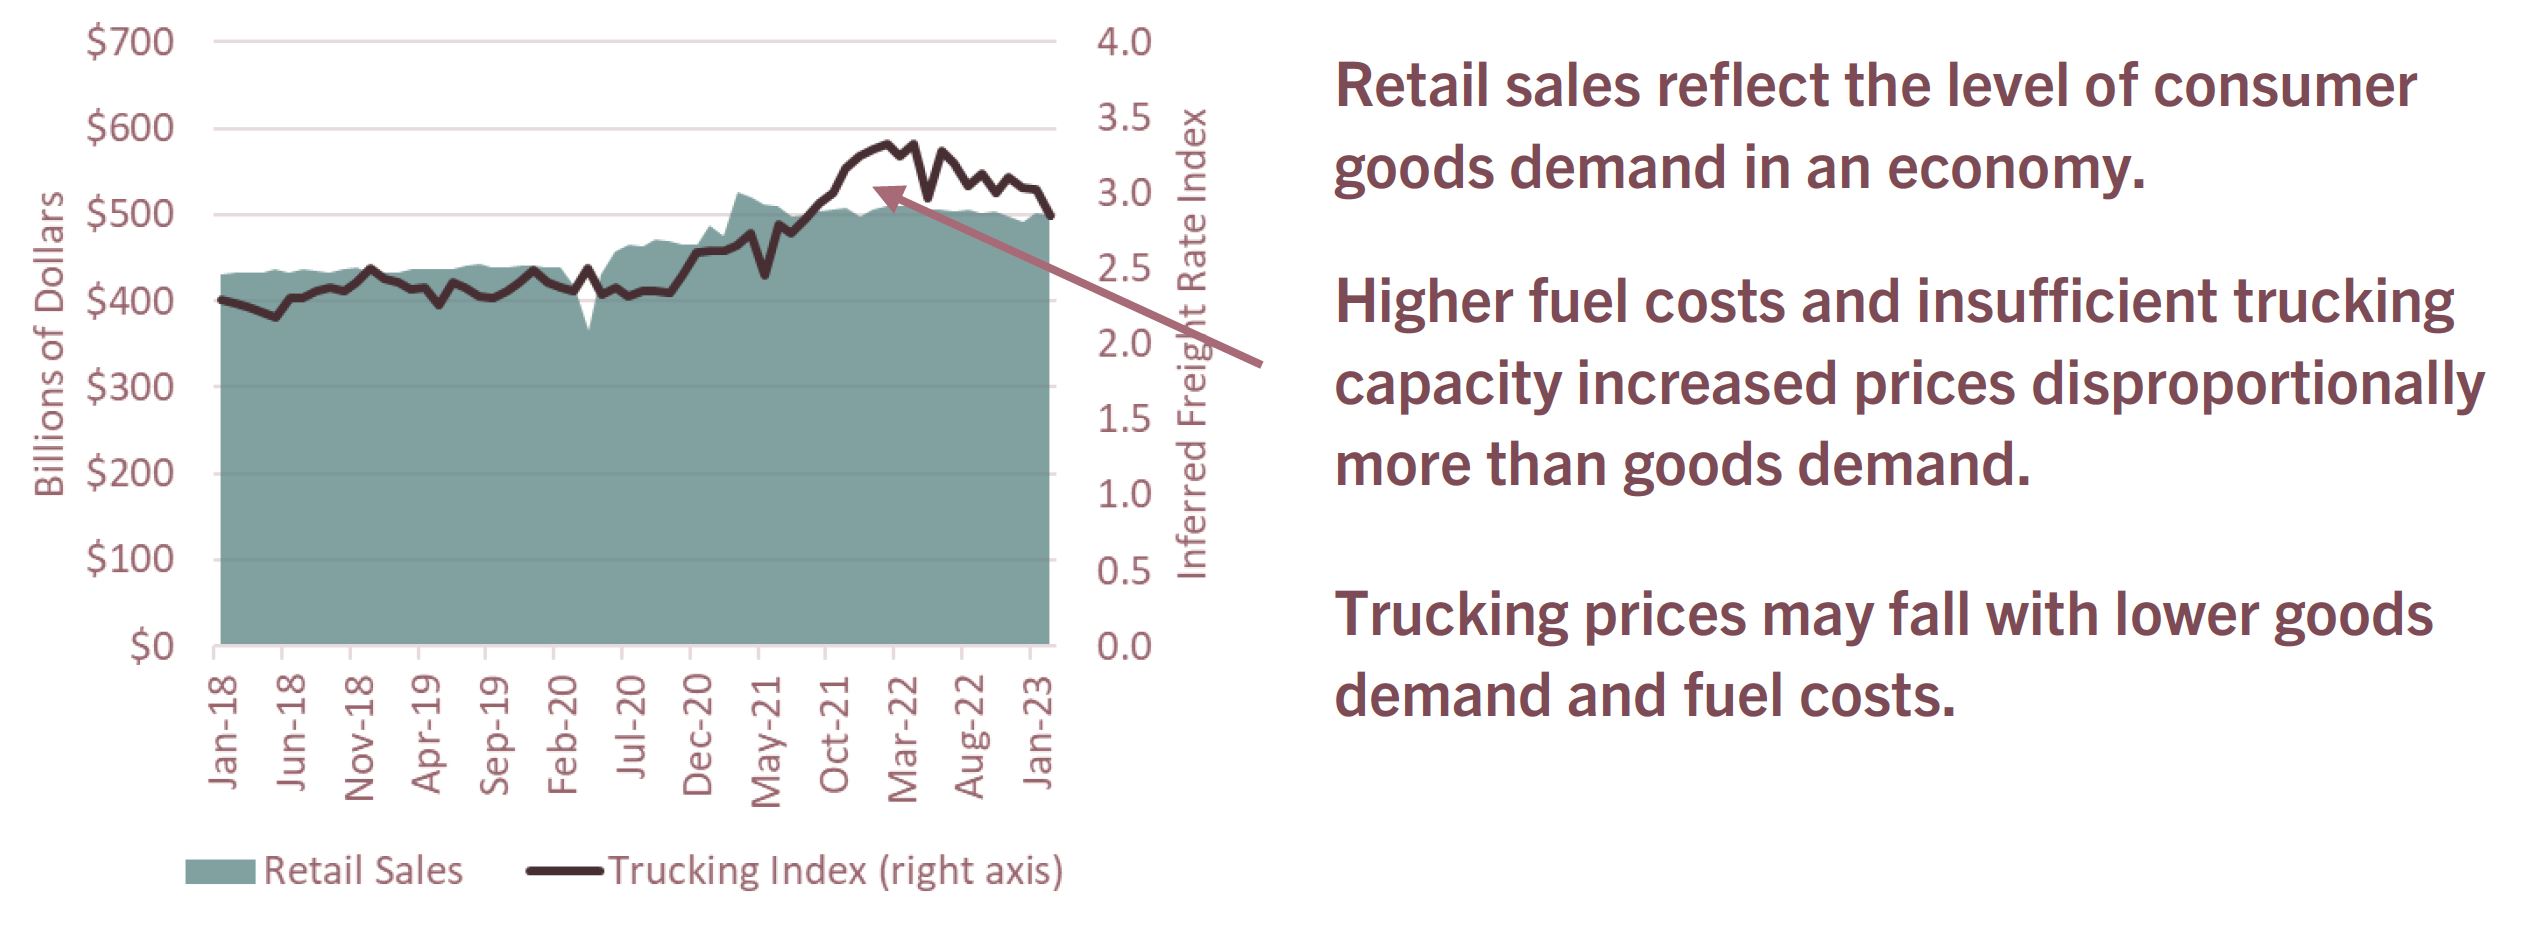 US Advanced Retail Sales and Inferred Trucking Costs